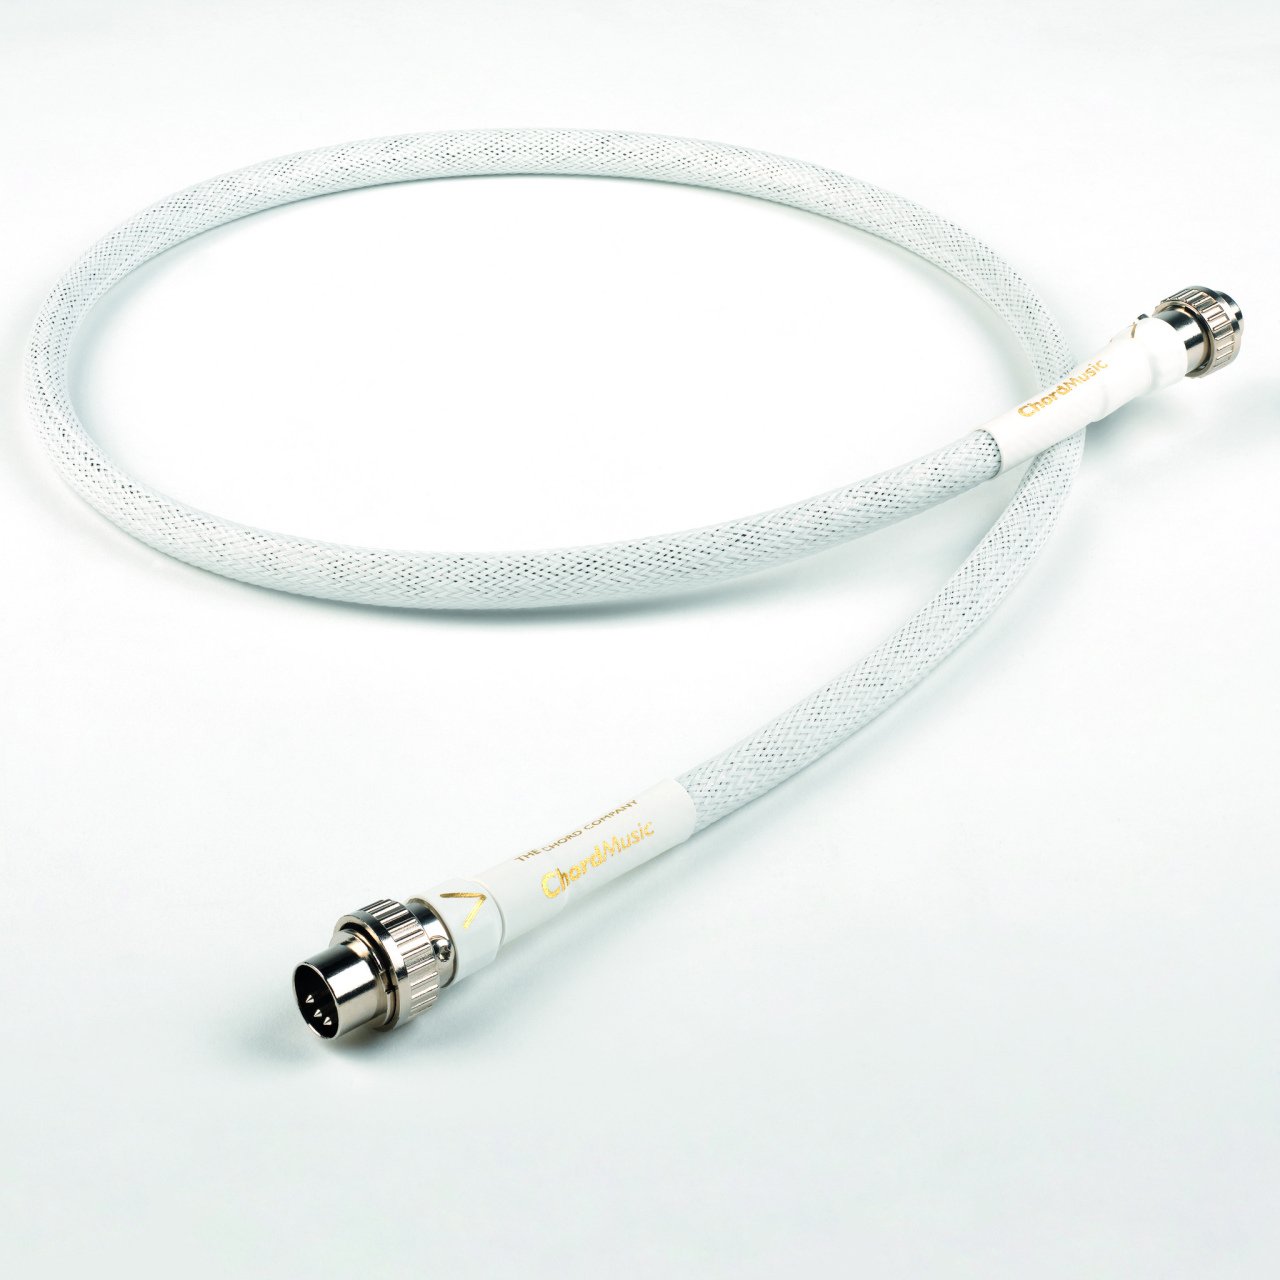 Chord ChordMusic DIN-DIN Audio Cable - 1 Metre